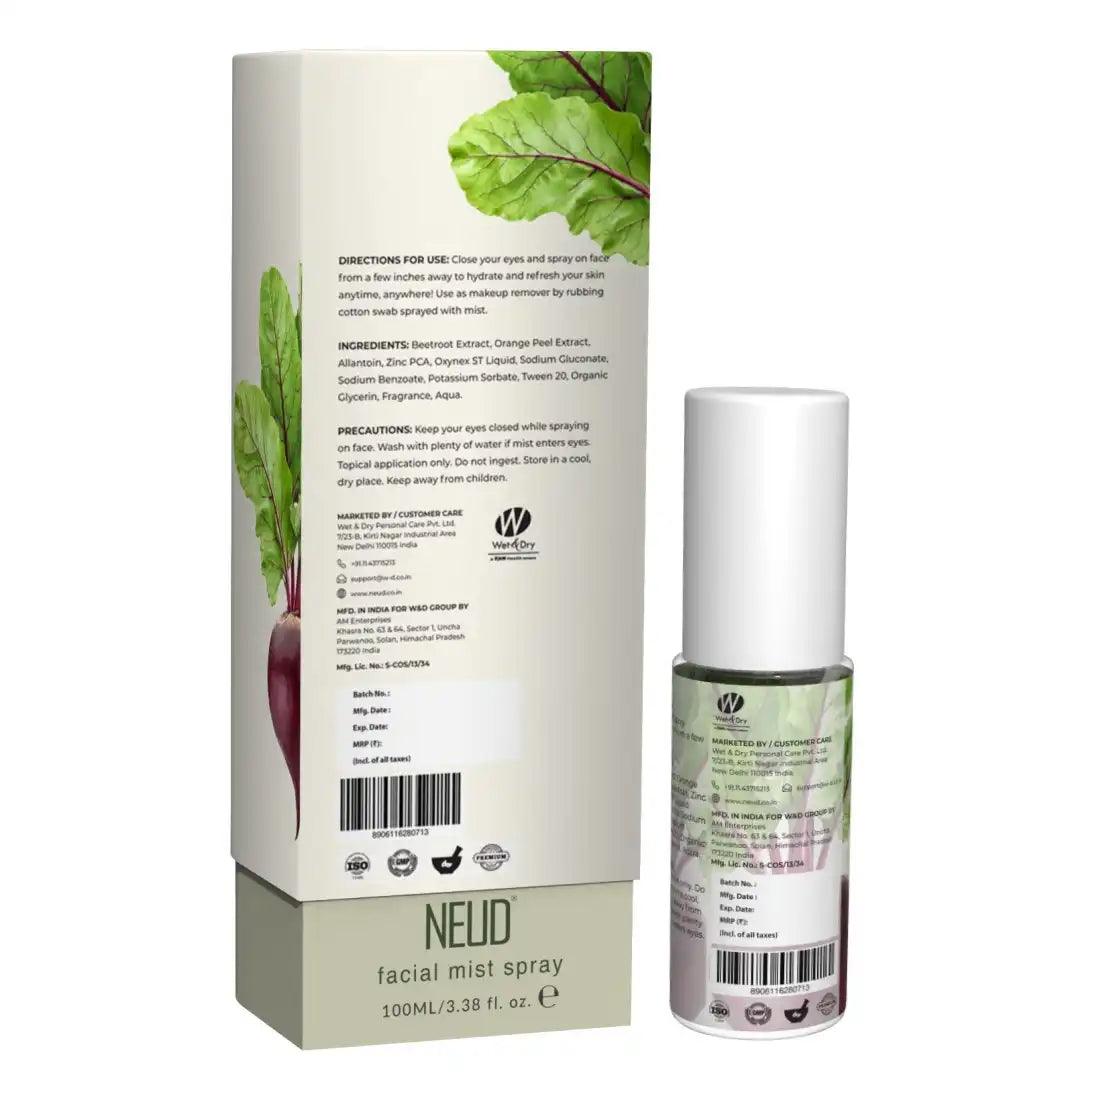 NEUD Beet Root Facial Mist Spray 100ml For Dull and Dry Skin is Shipped Worldwide - everteen-neud.com